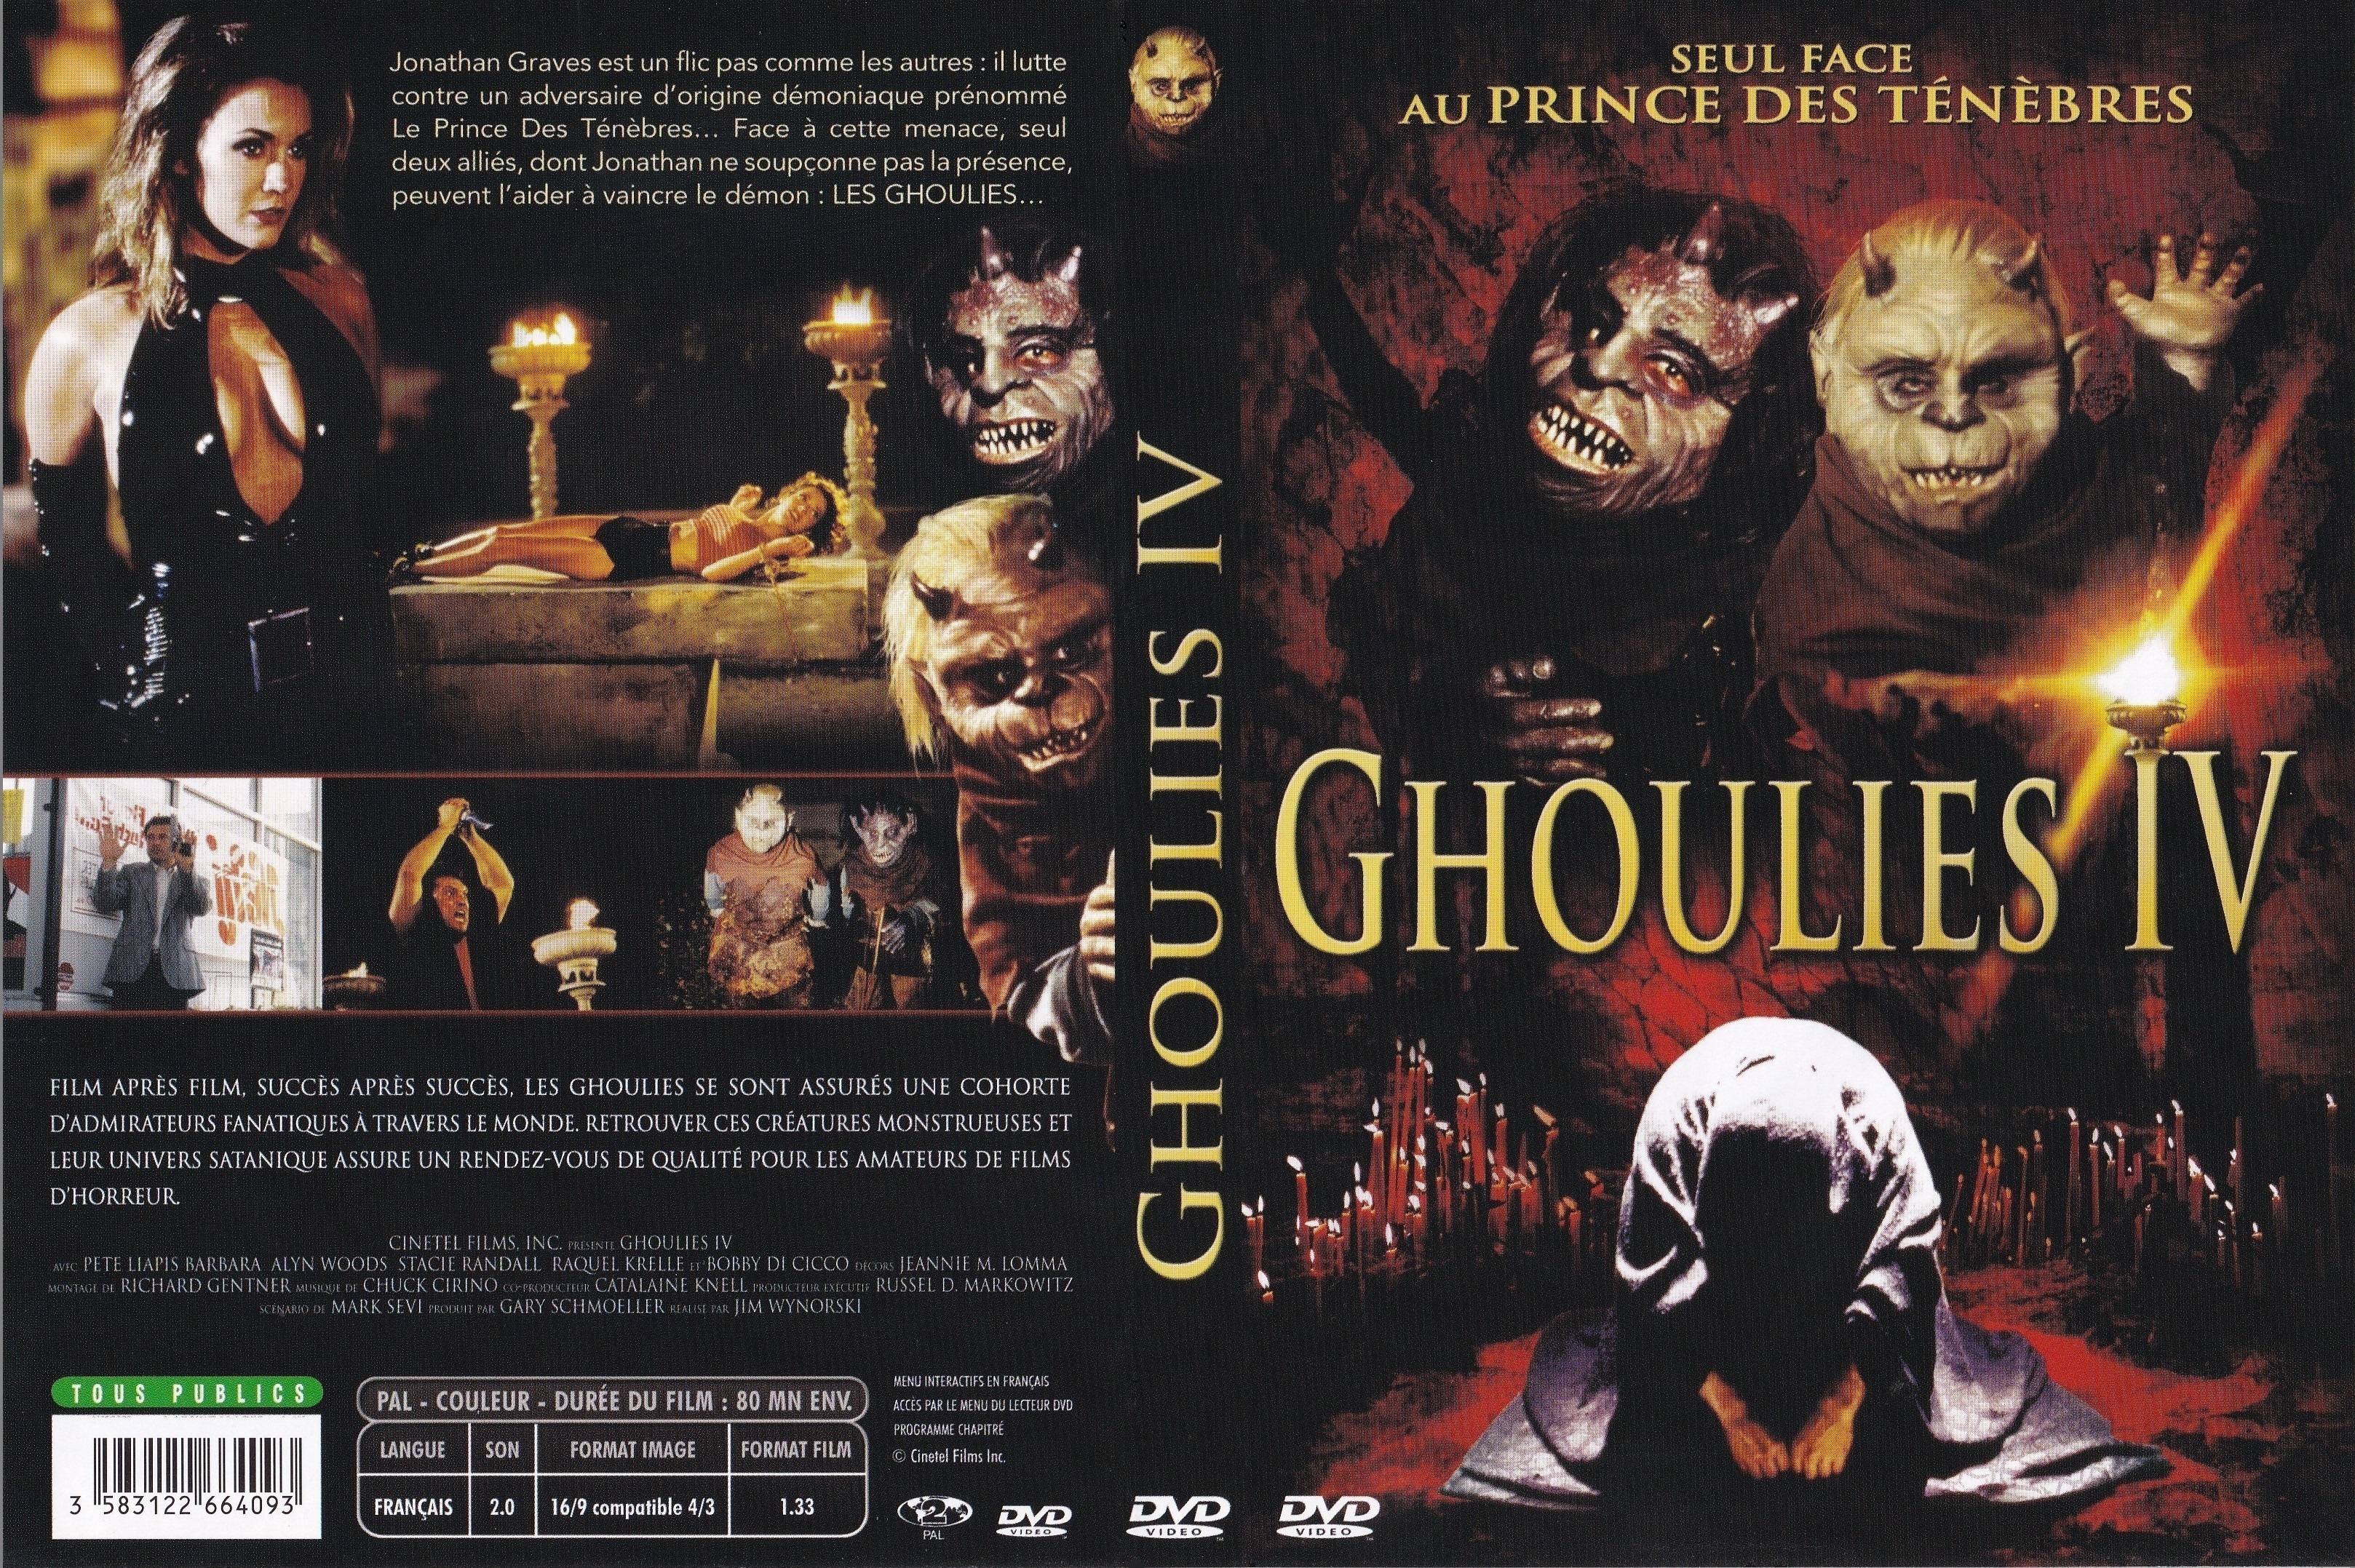 Jaquette DVD Ghoulies IV